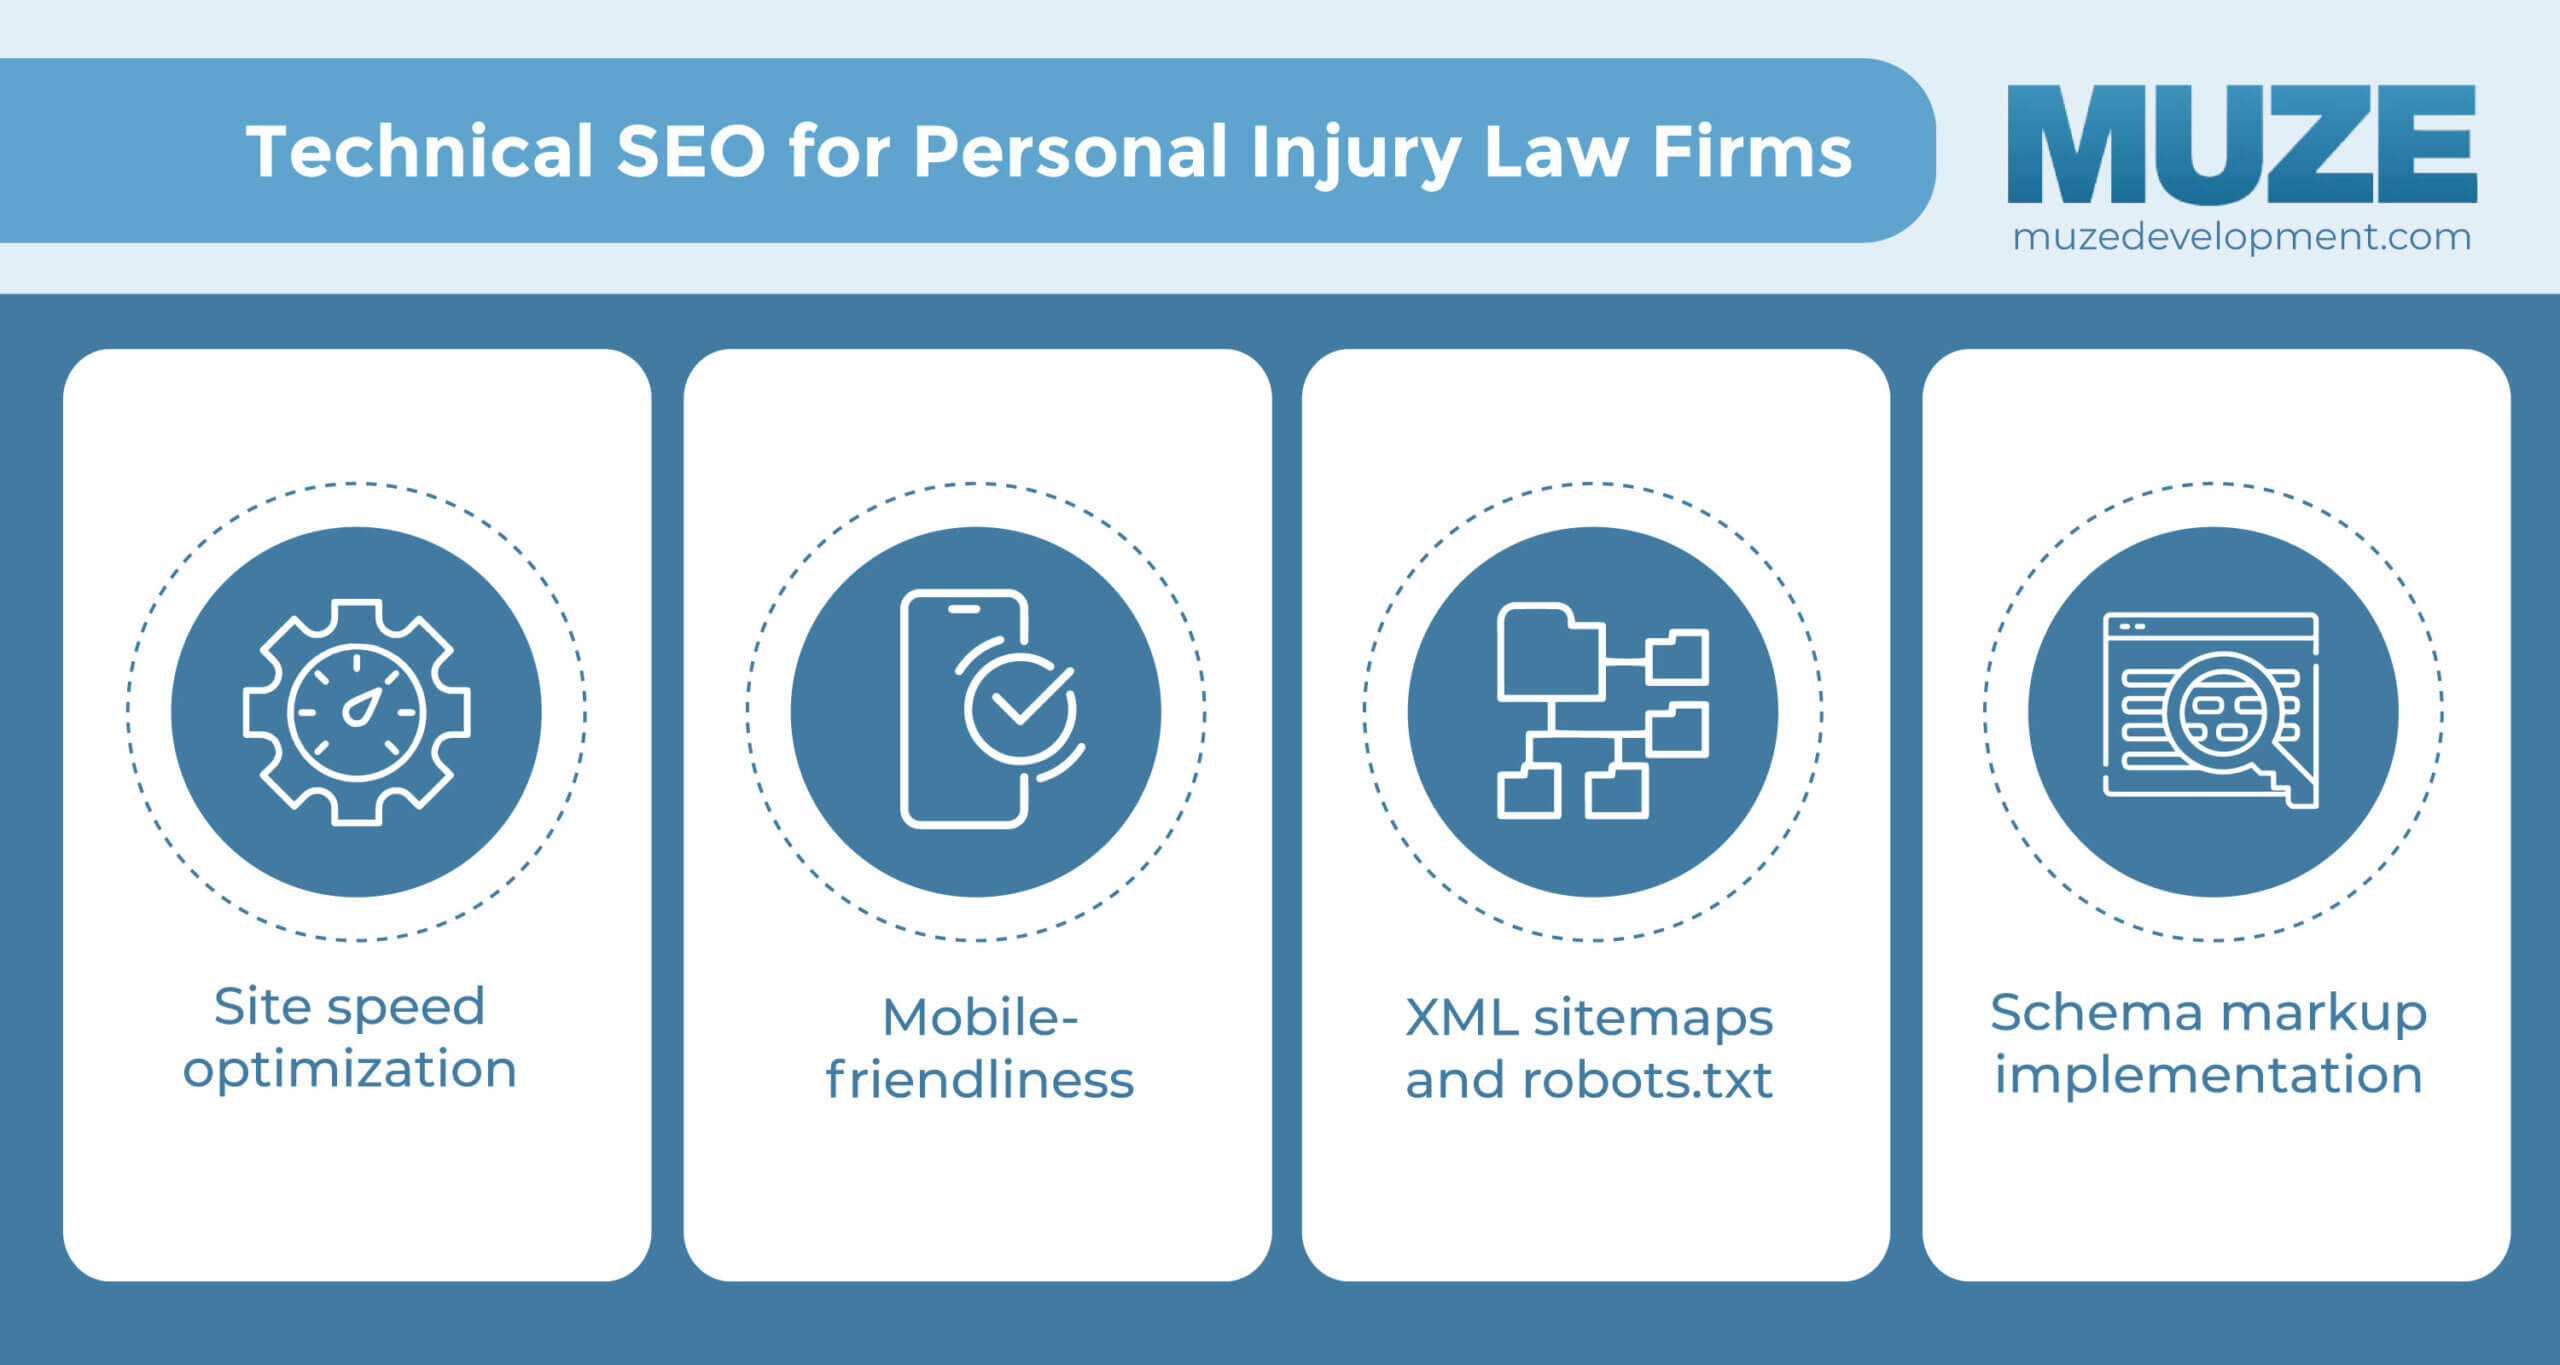 Technical SEO for Personal Injury Law Firms